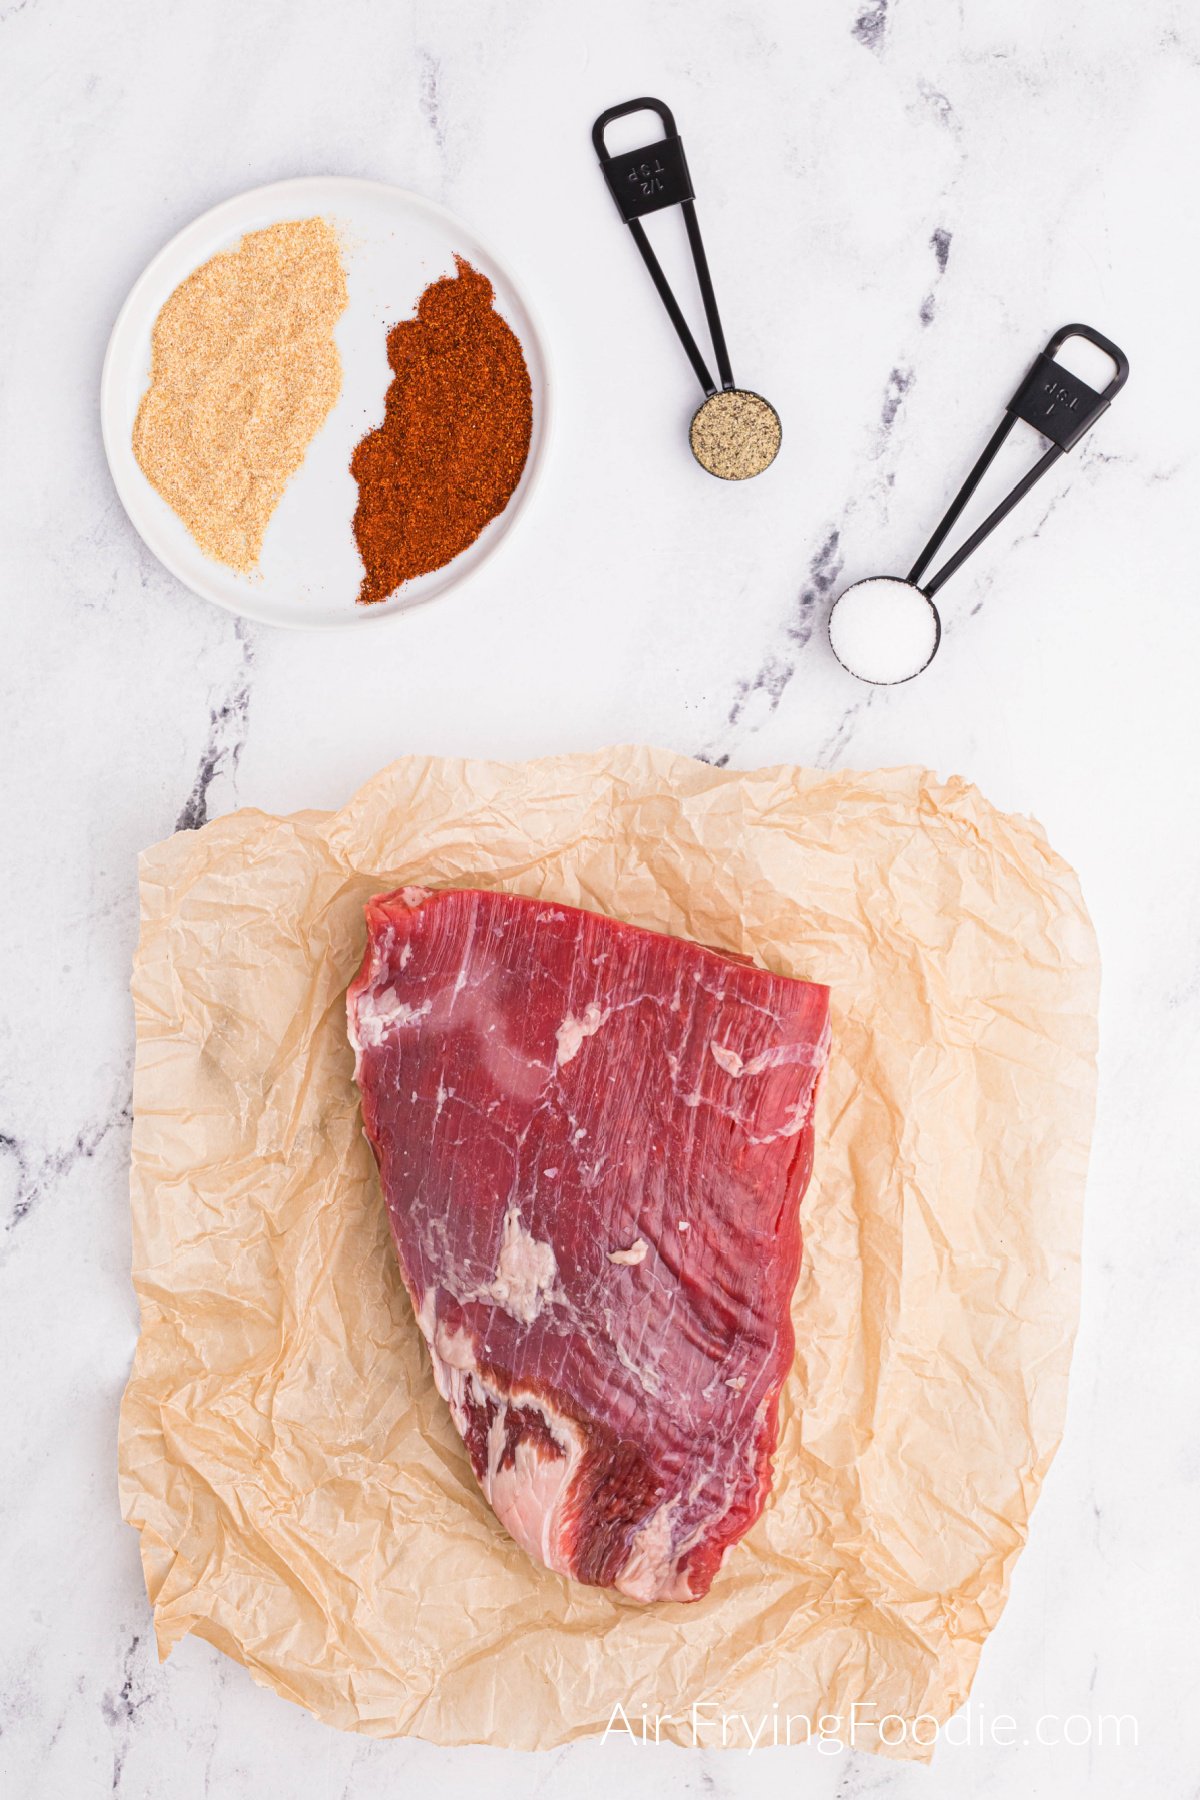 Flank steak on butcher paper and seasonings in a bowl and in measuring spoons on a white table. 